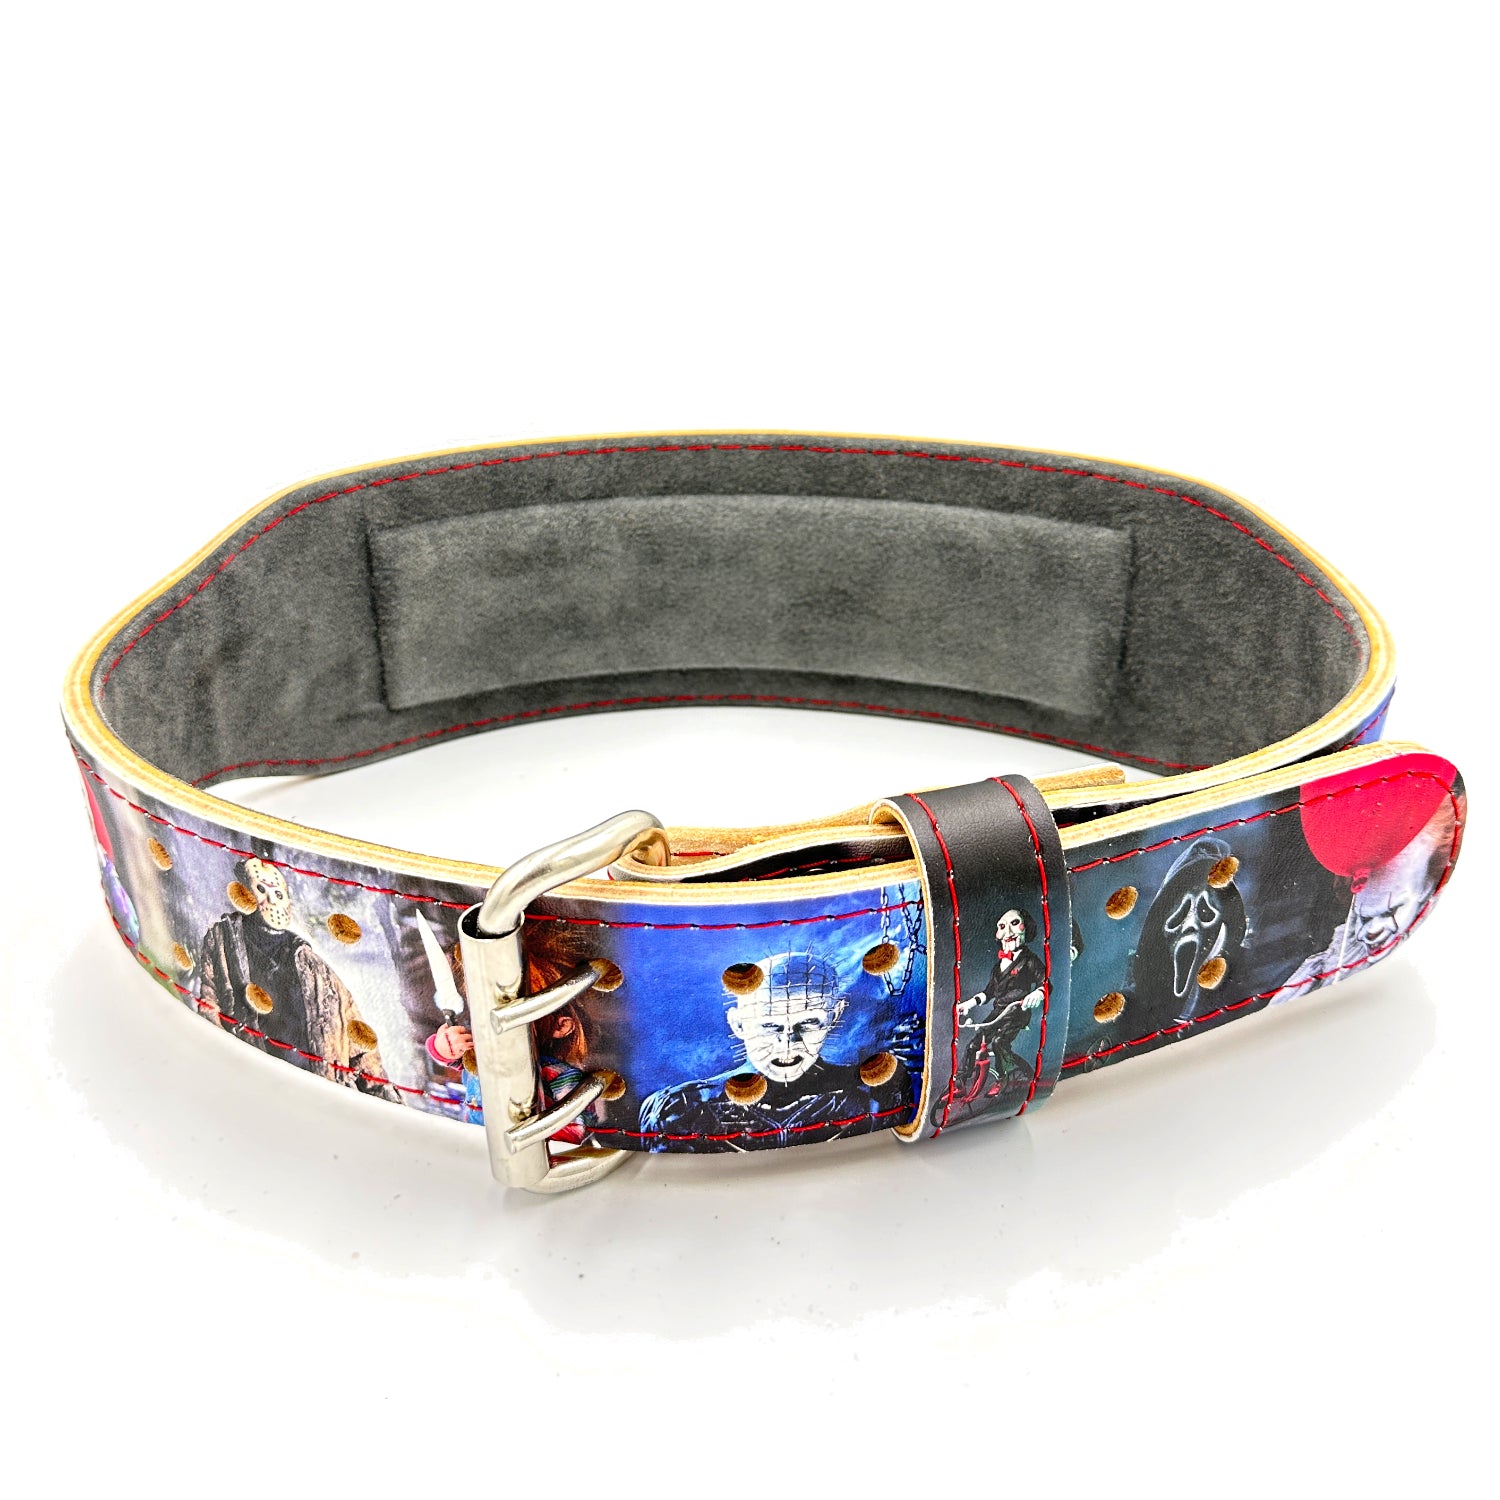 Horror Movies Weightlifting Belt - Hand Made in UK (CUSTOMISABLE)